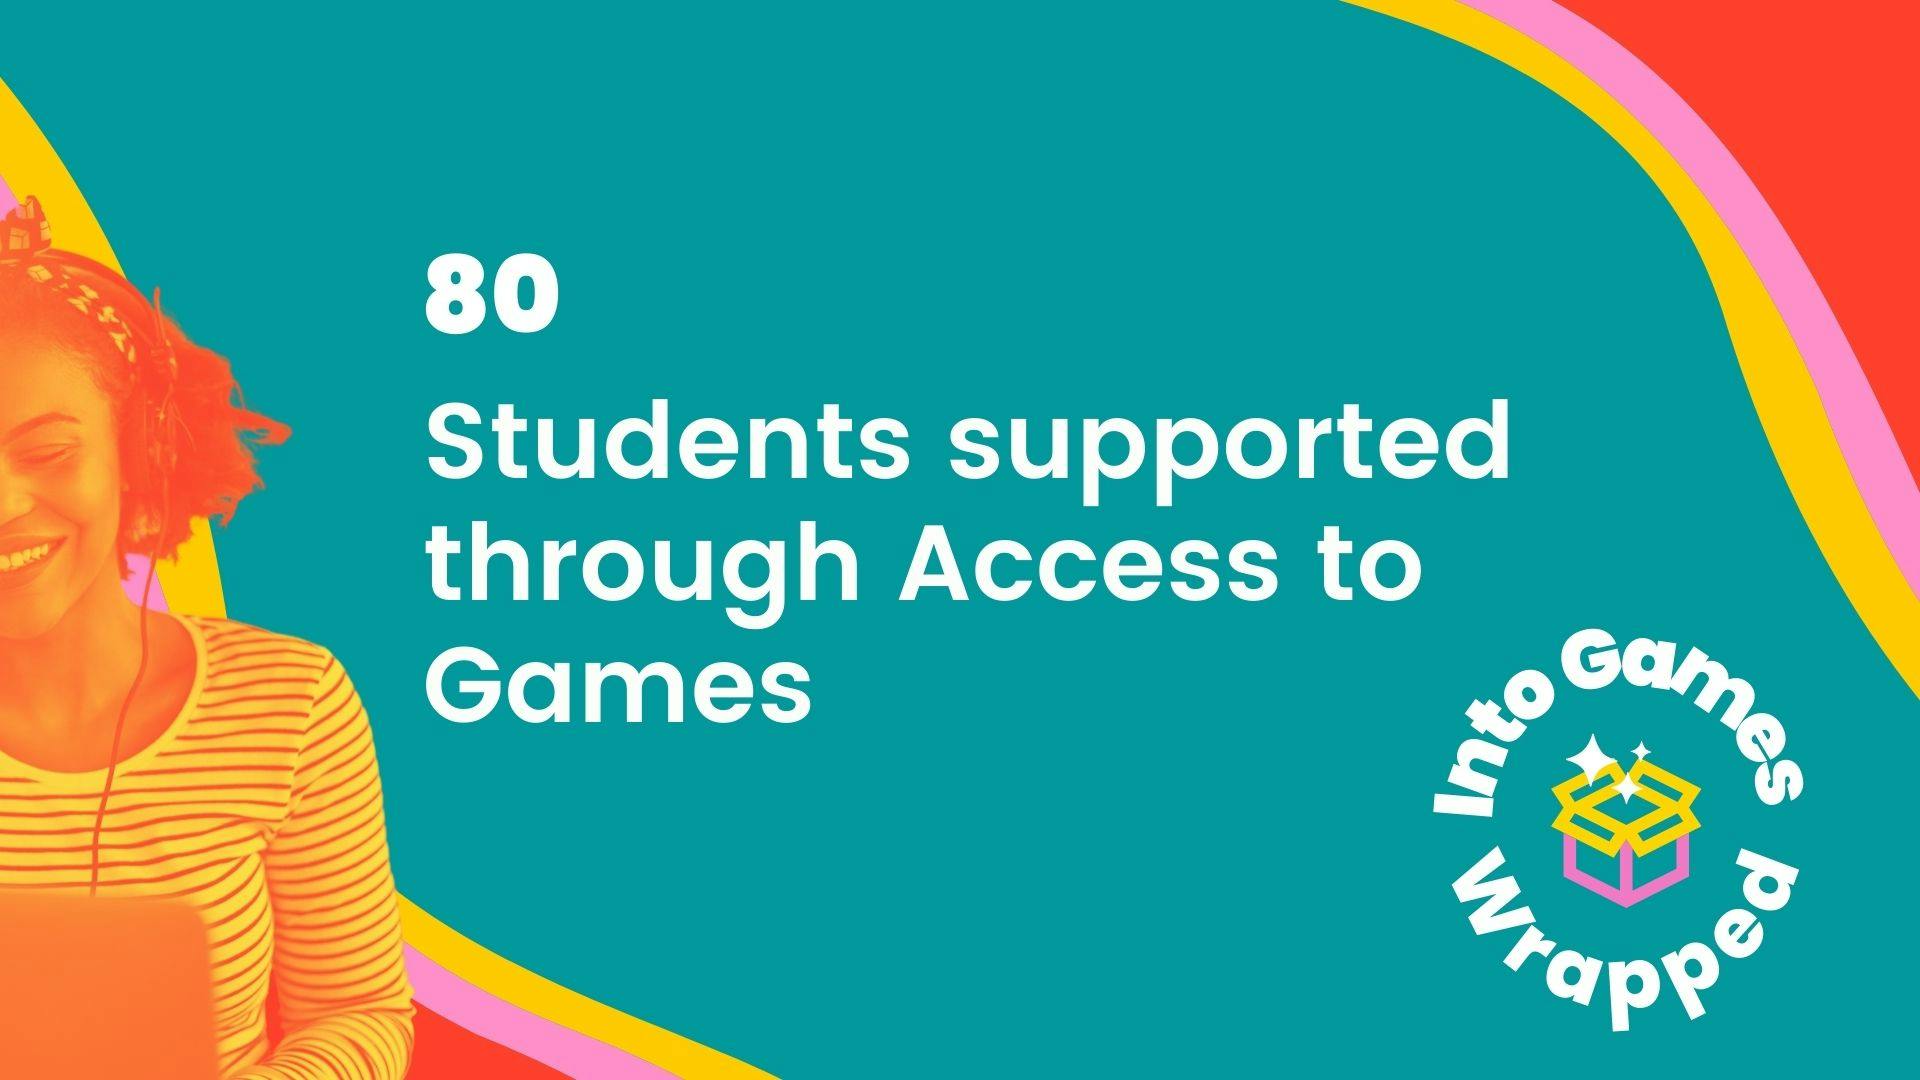 80 students supported through access to games electric square 